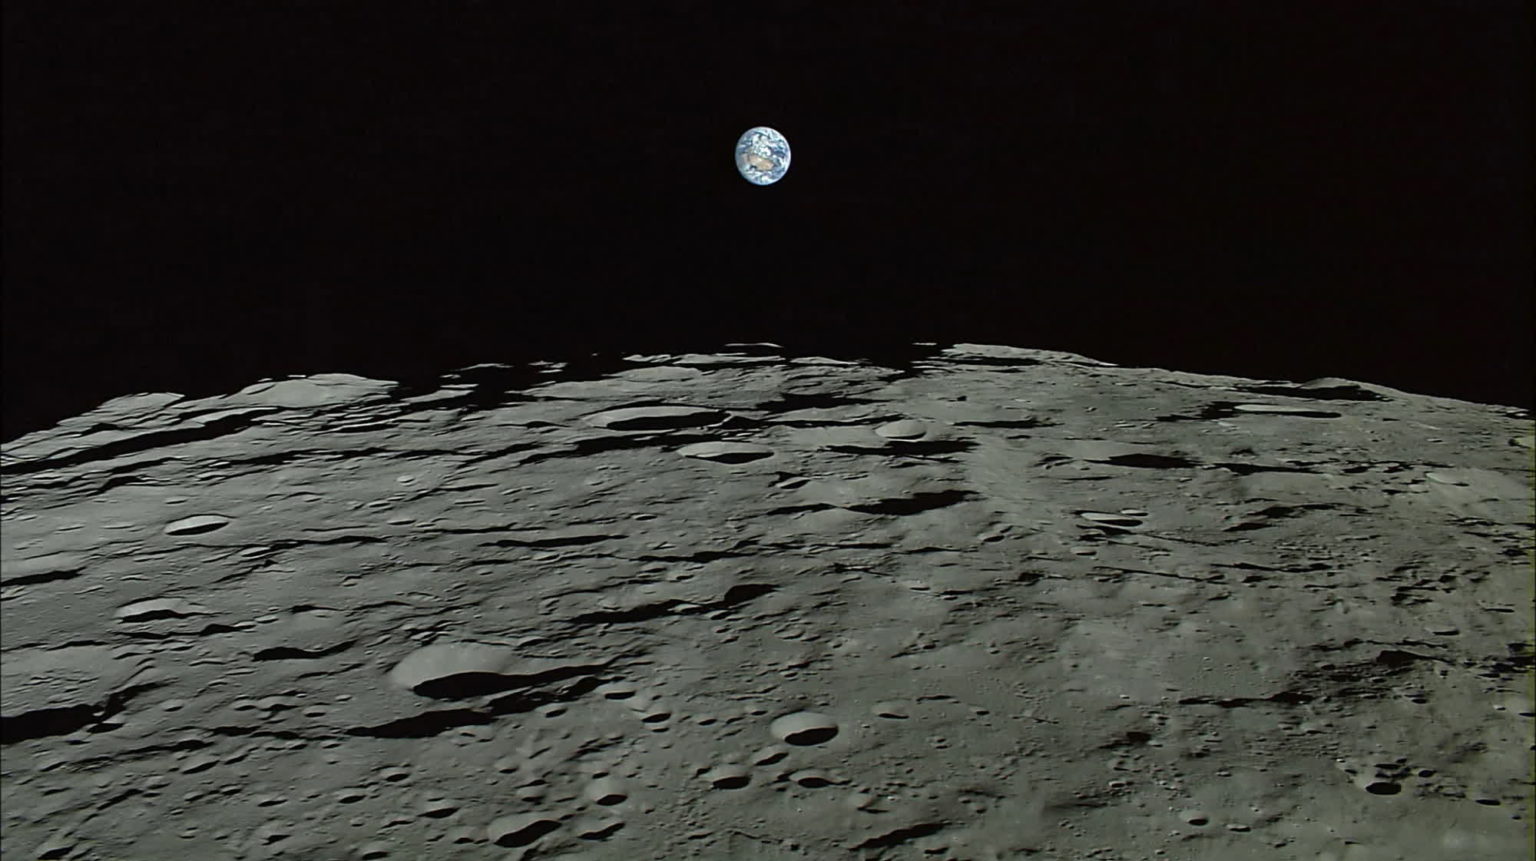 Researchers propose installing a fiber network on the Moon